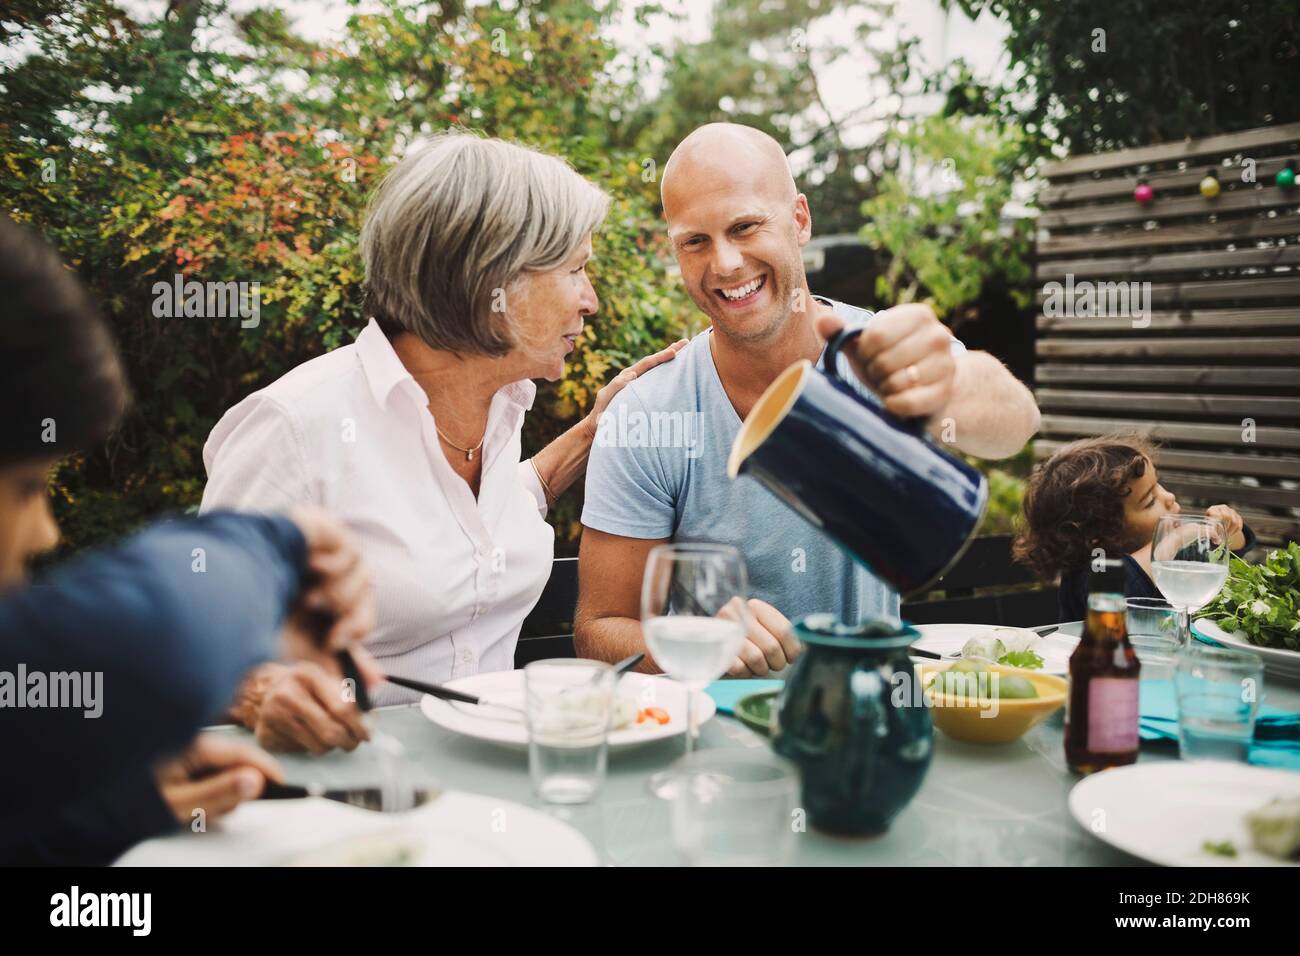 Happy man serving water to mother at outdoor dining table Stock Photo